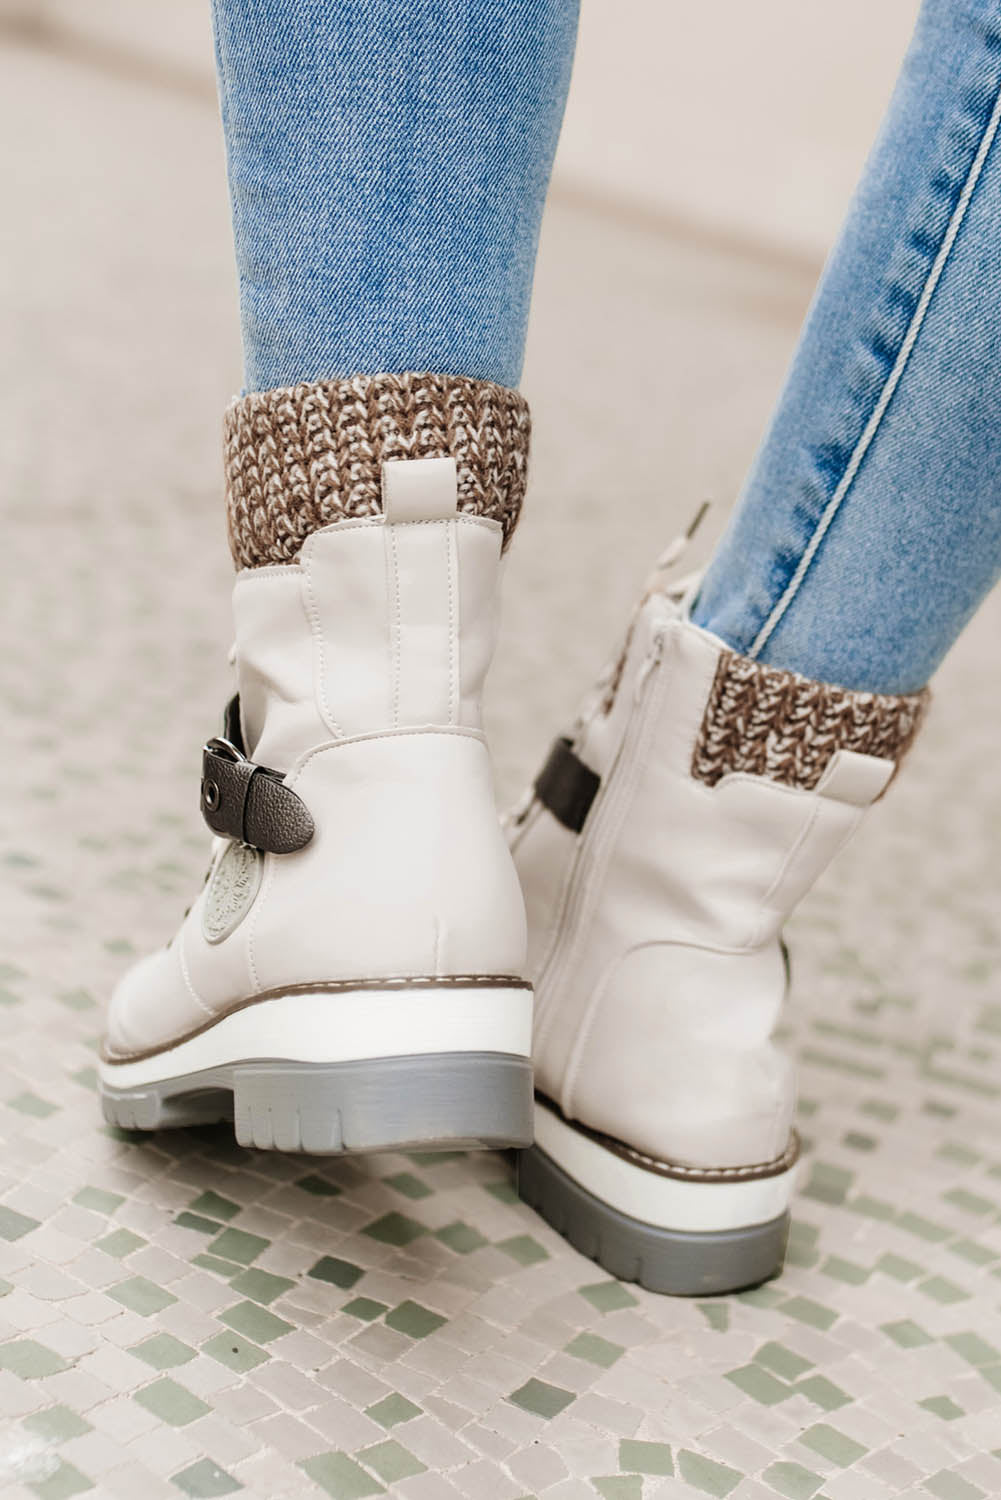 Buckle Lace-up Zipped PU Leather Heeled Boots